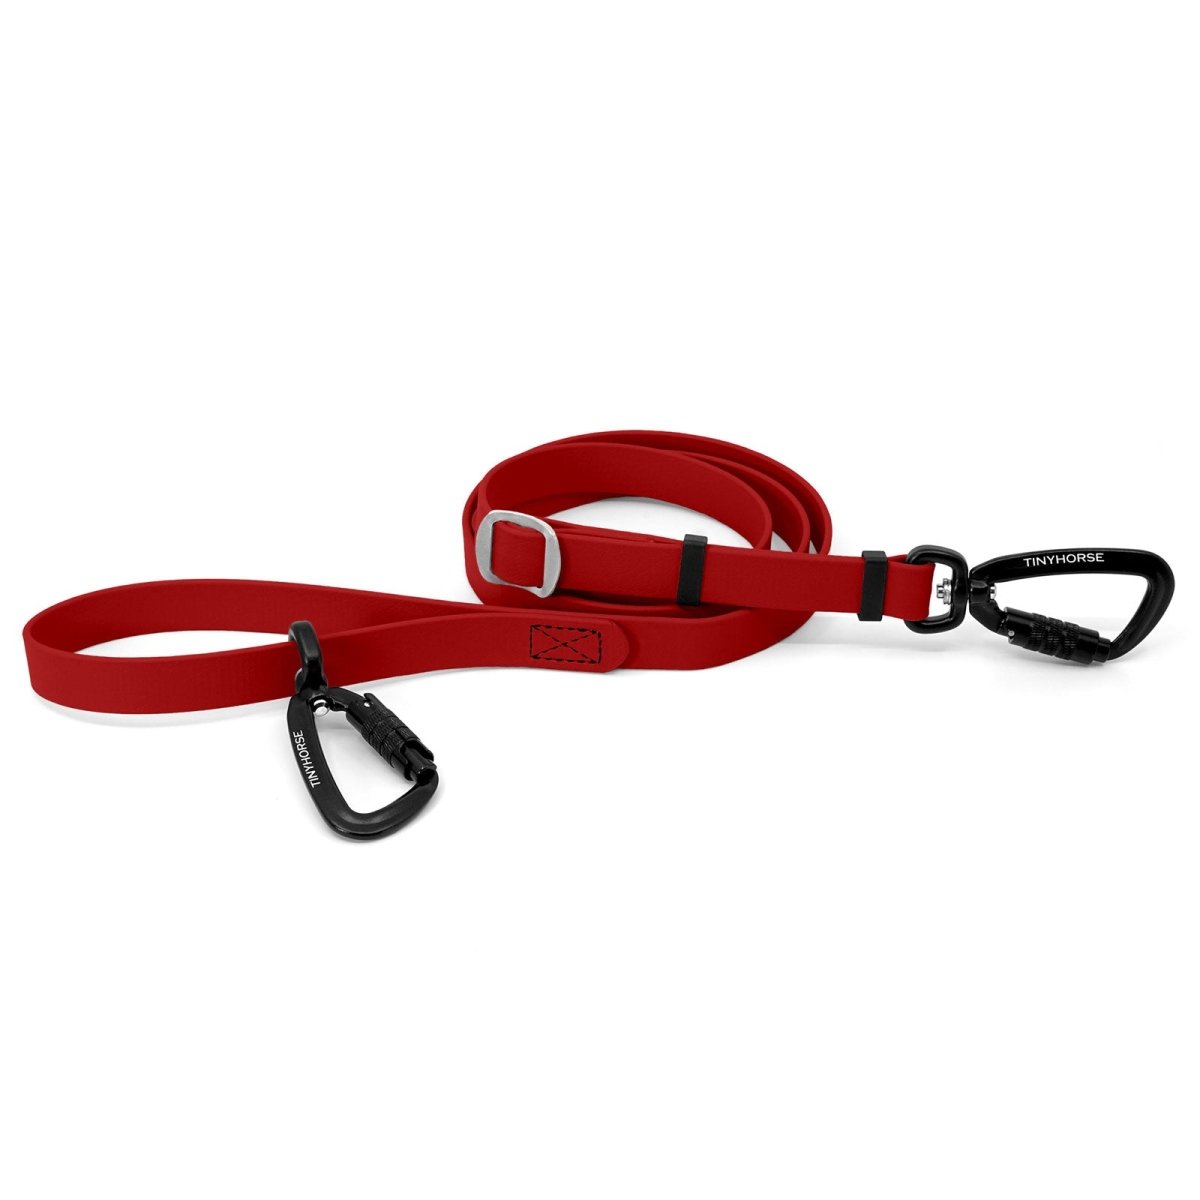 An adjustable red-coloured Lead-All Pro Extra made of BioThane with 2 auto-locking carabiners